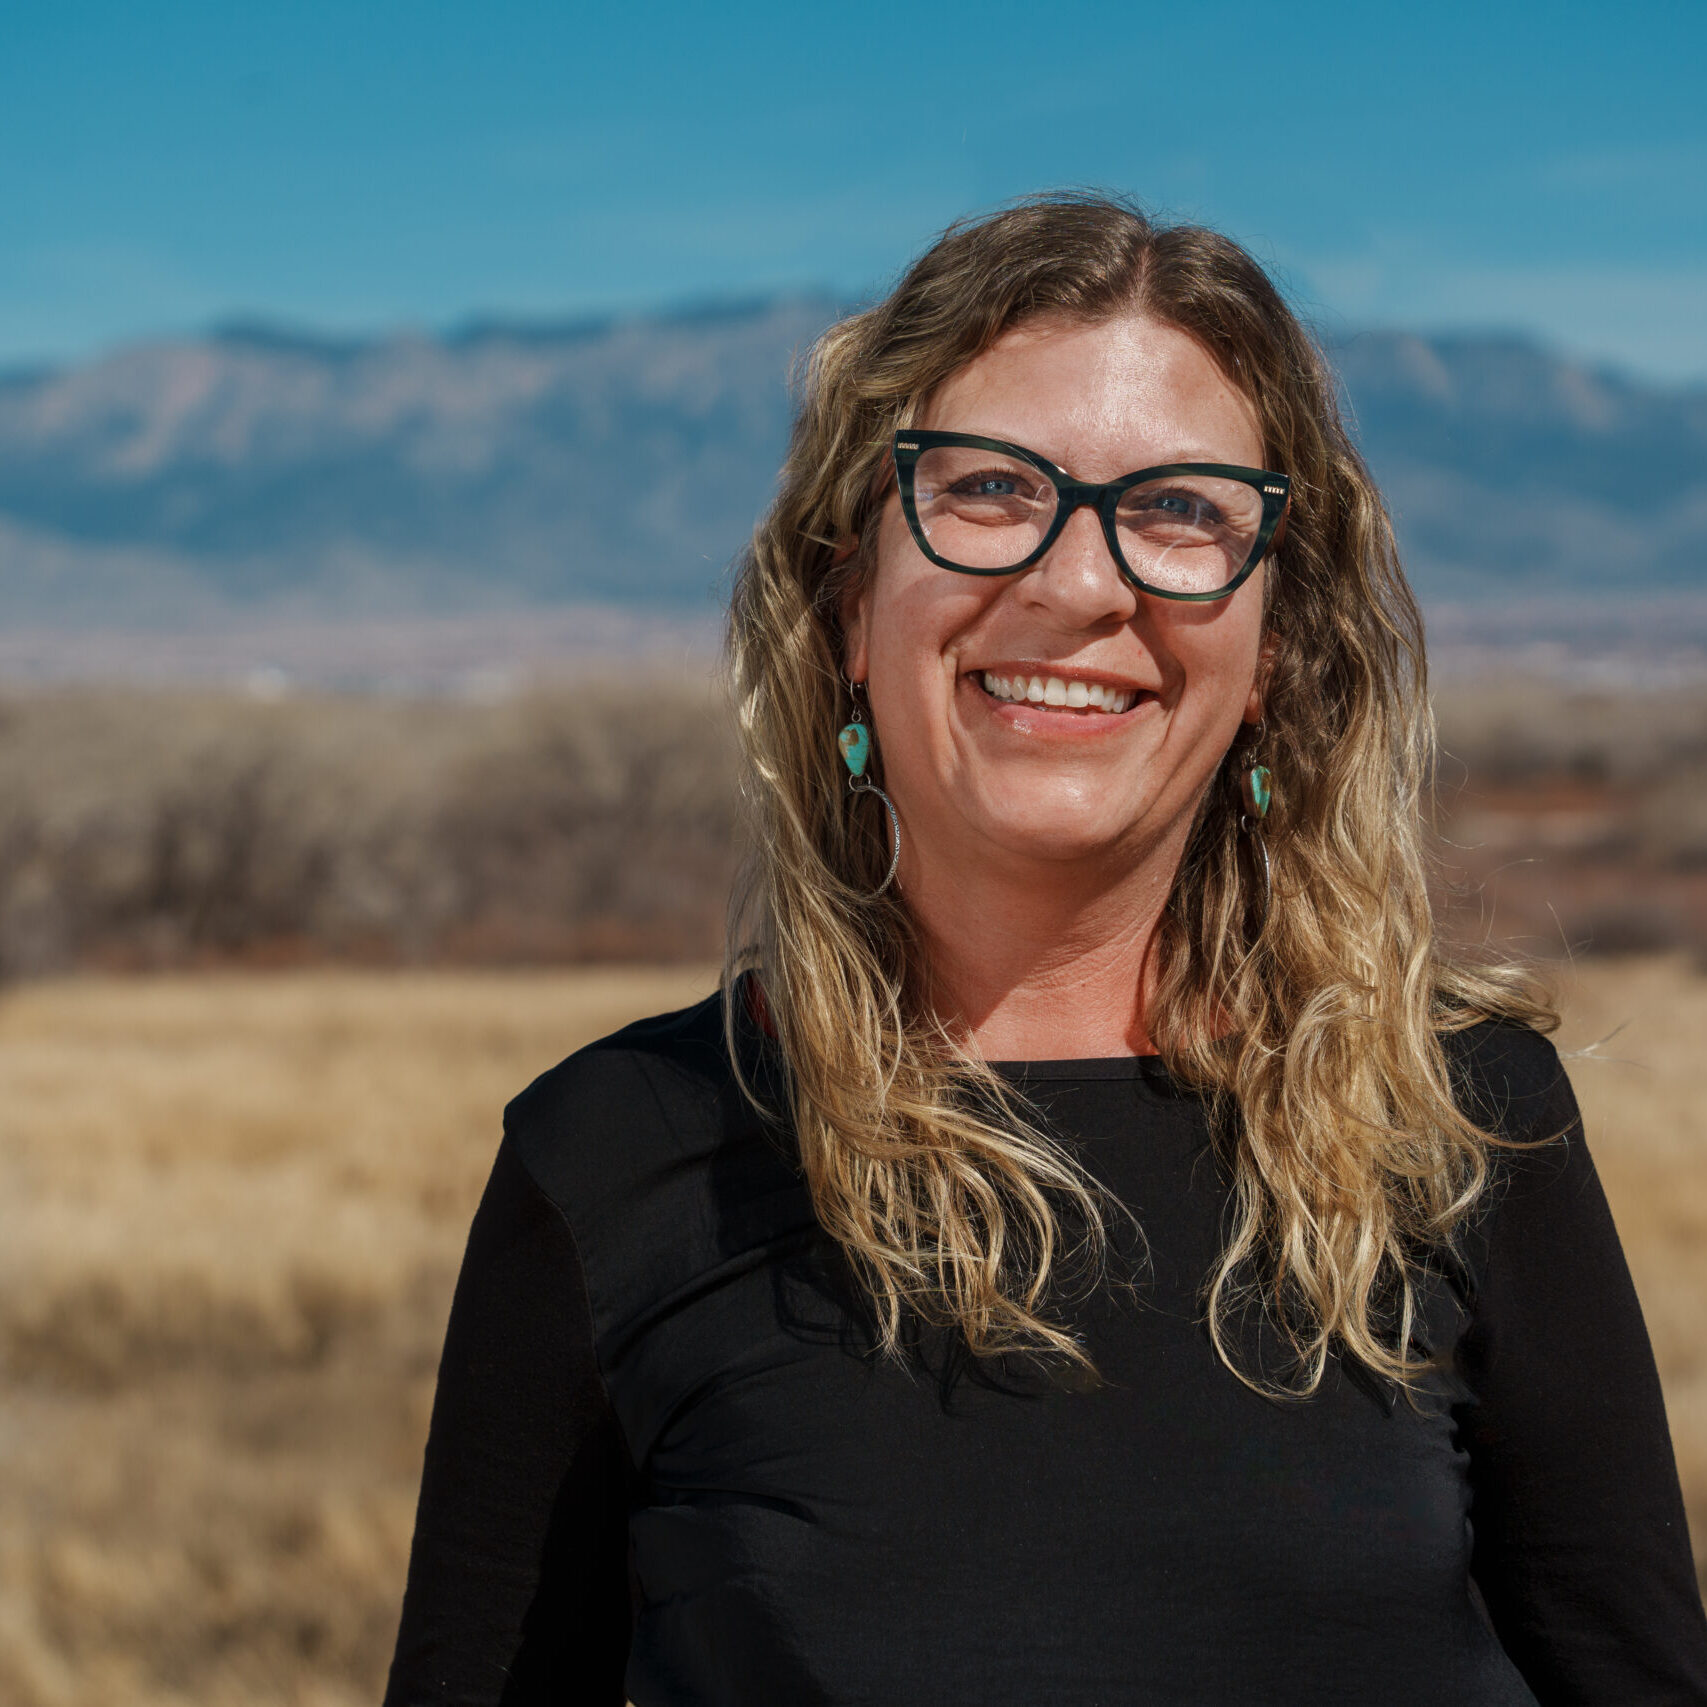 Smiling woman with glasses standing outdoors with a mountainous backdrop.